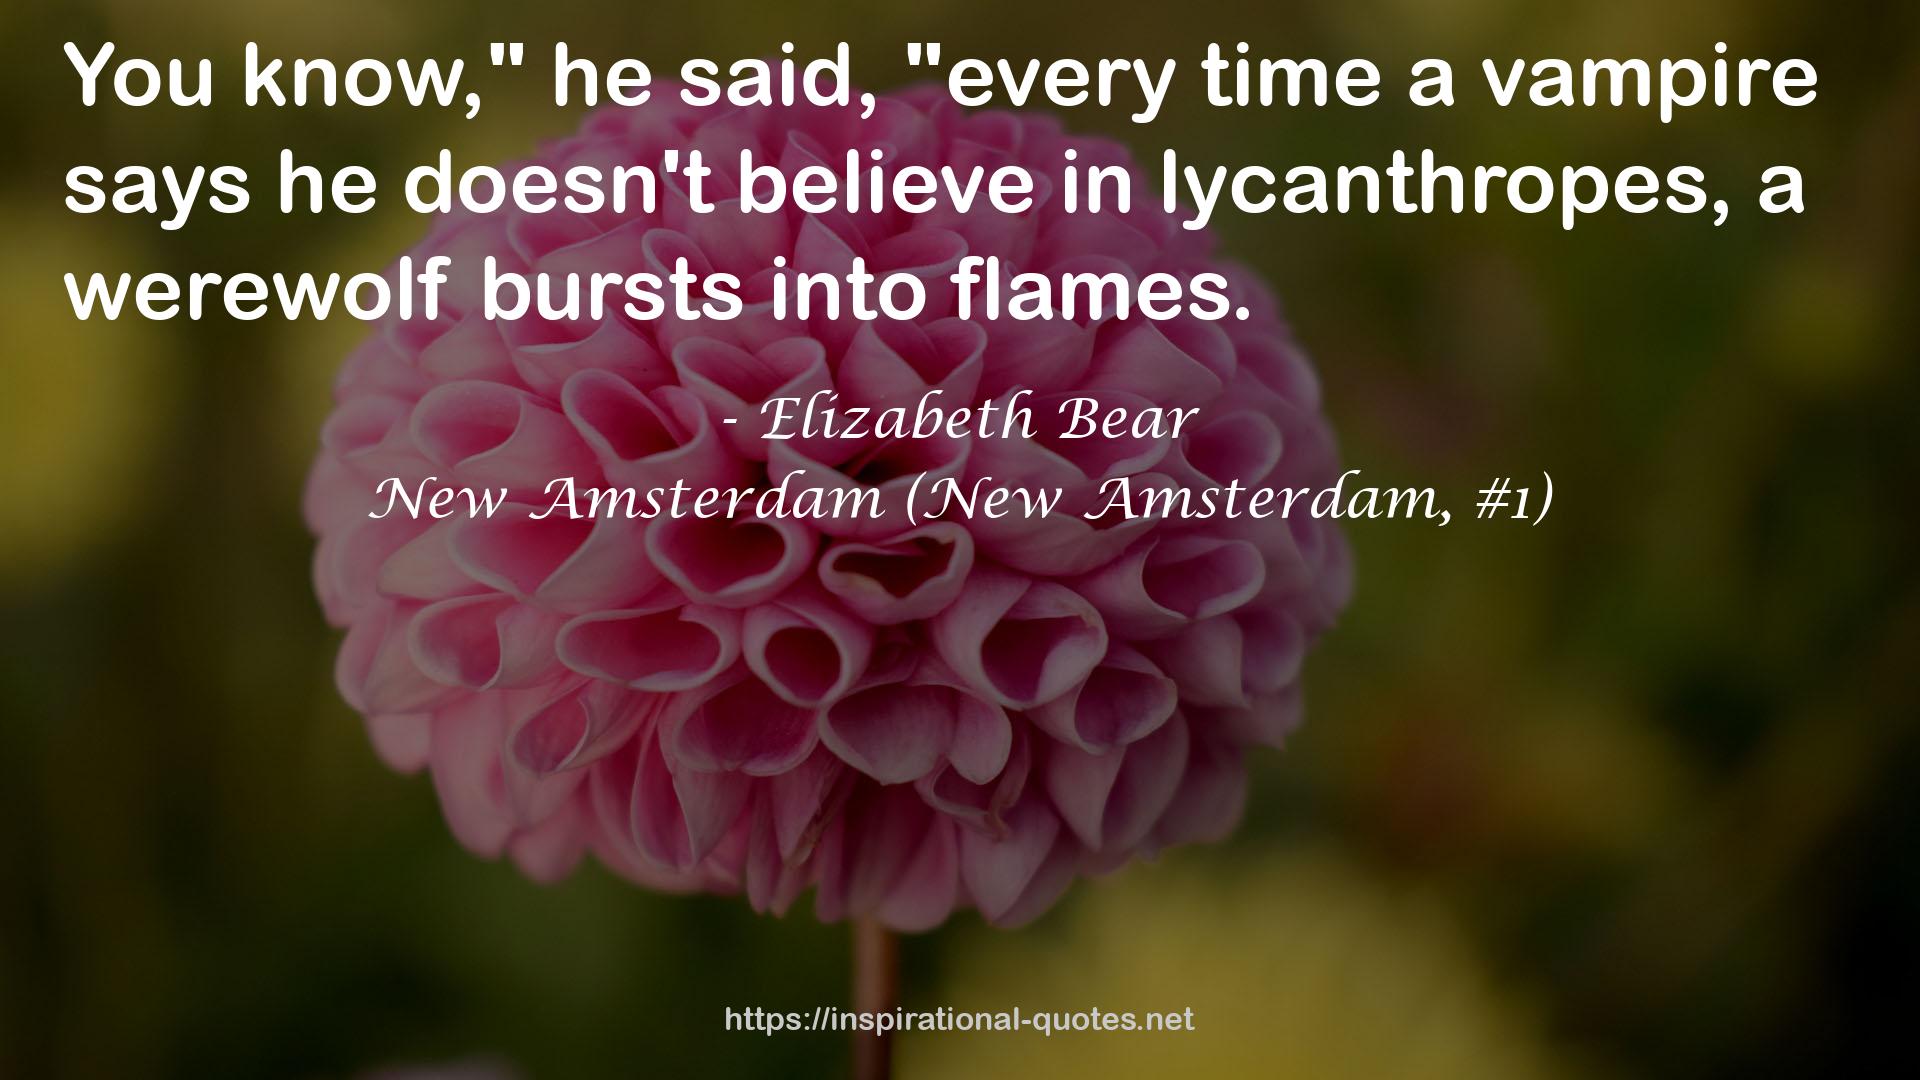 New Amsterdam (New Amsterdam, #1) QUOTES